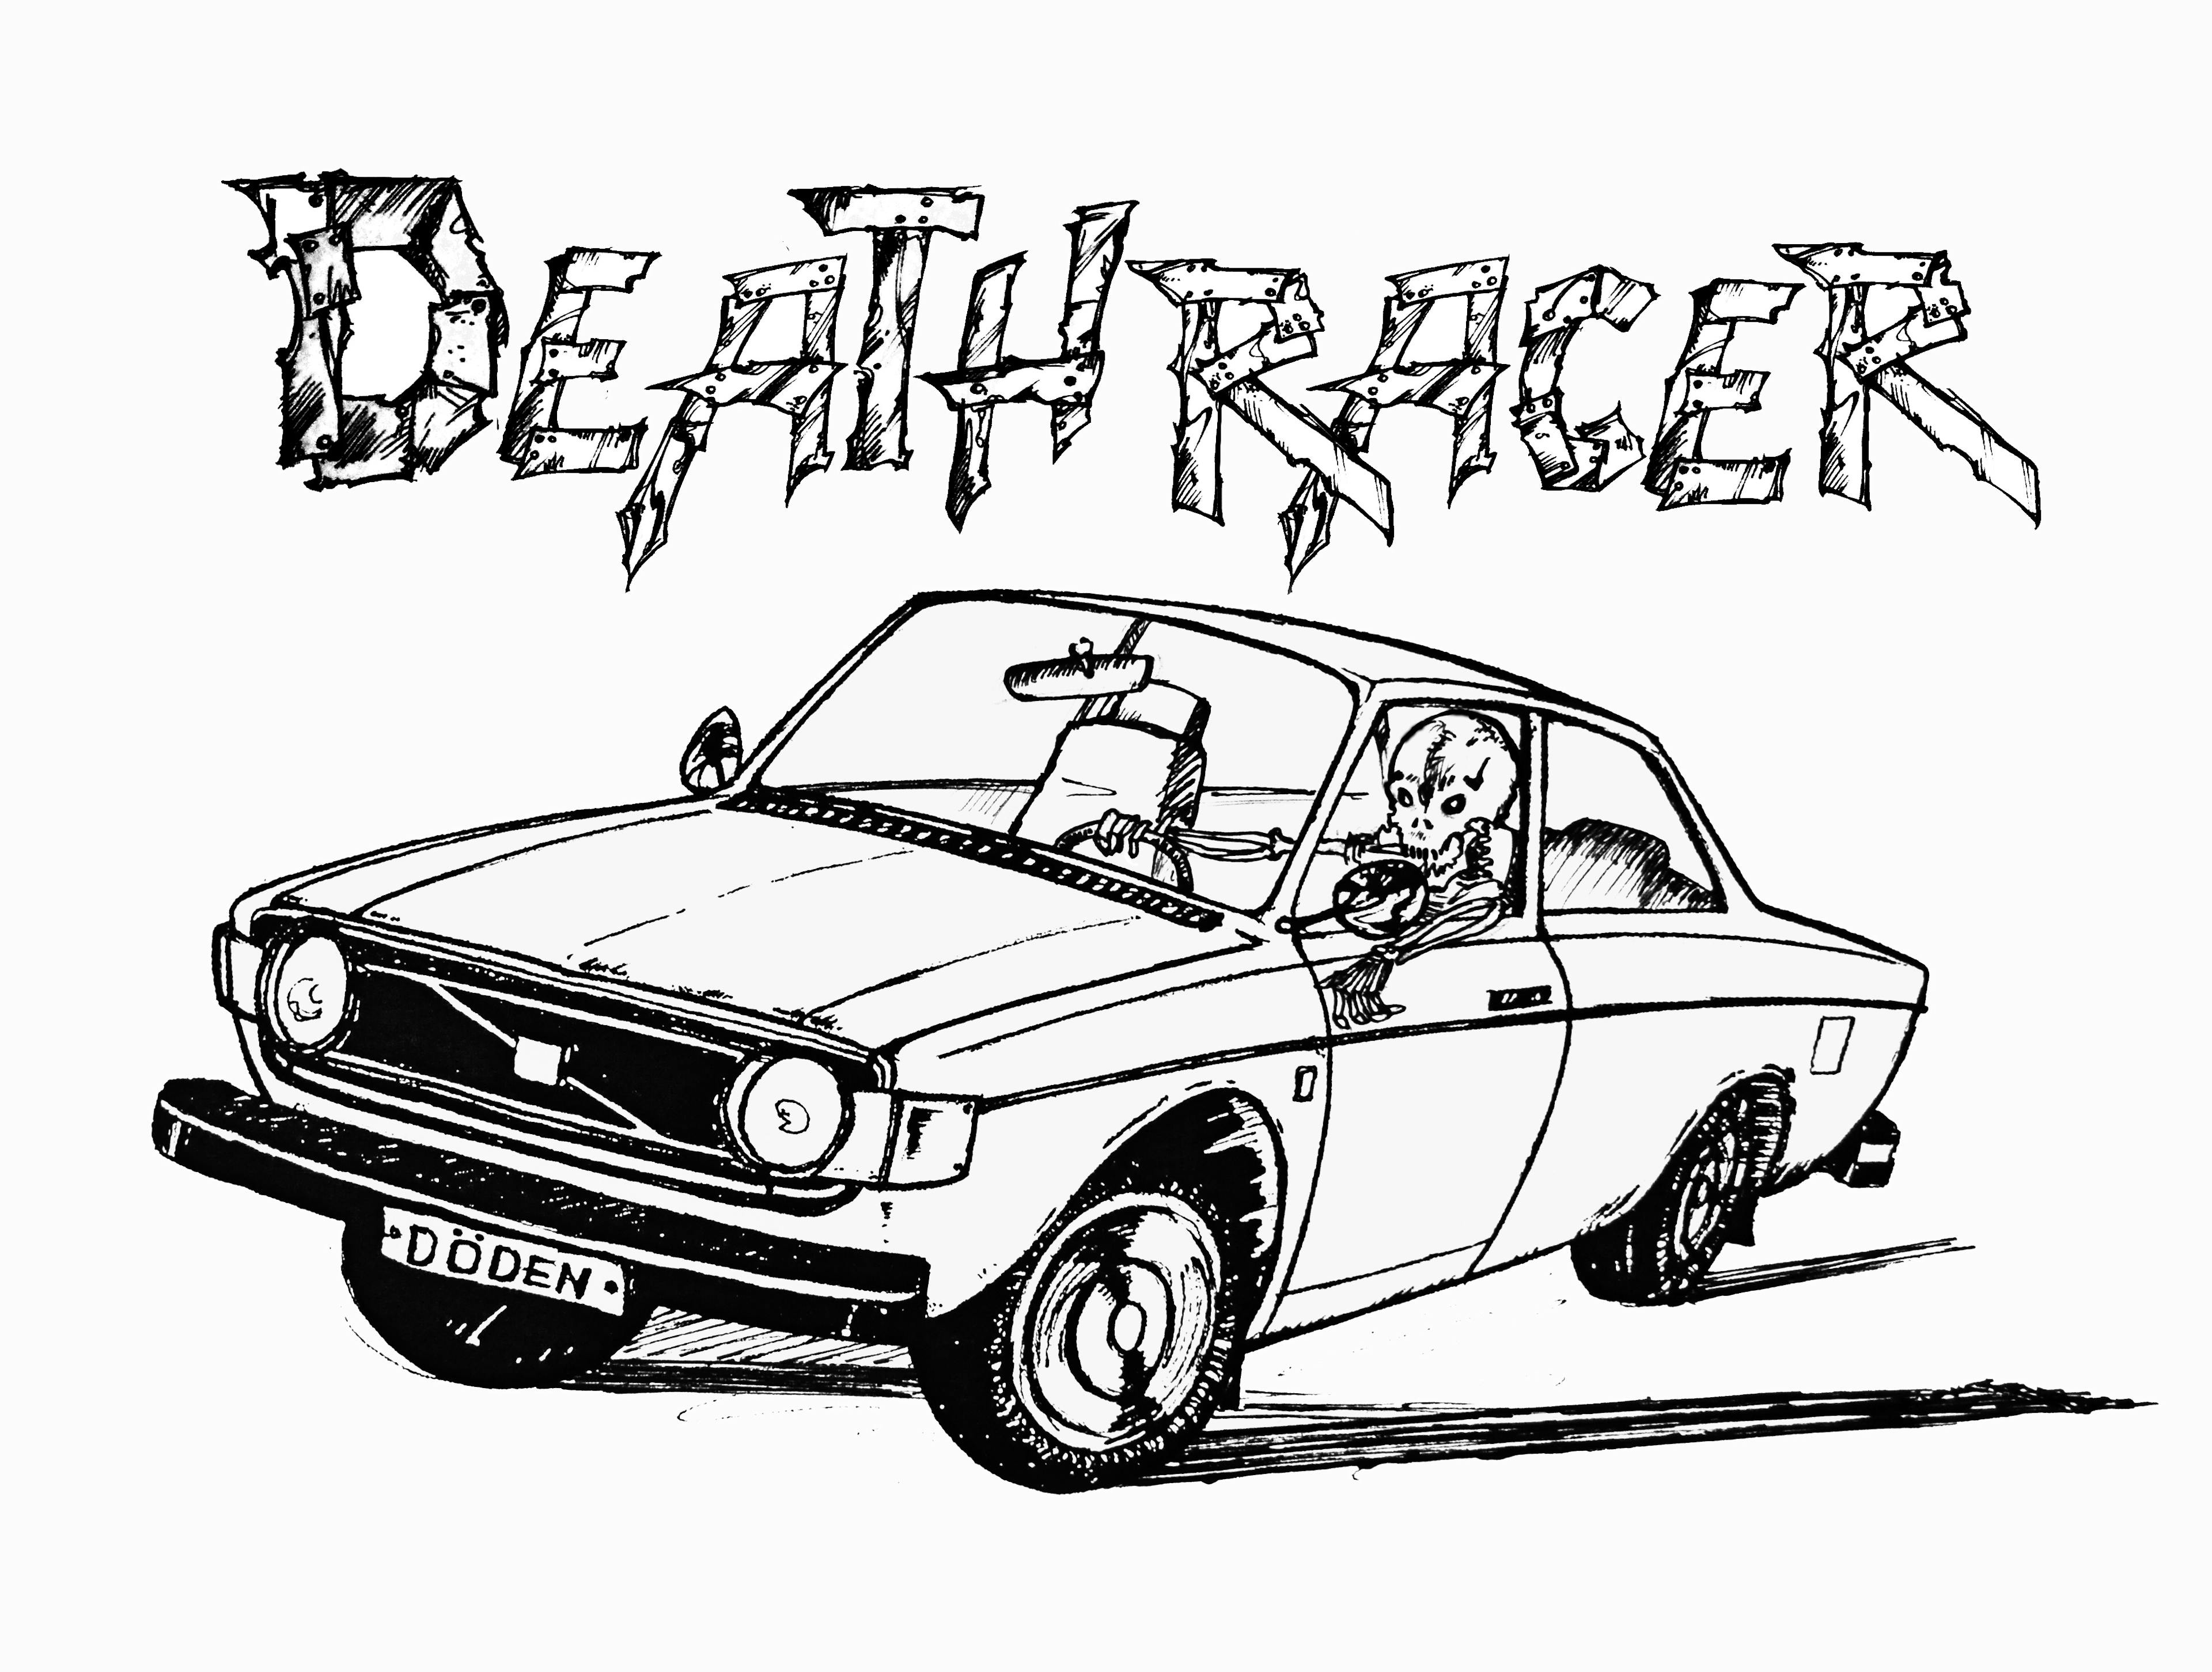 Deathracer logo - a Volvo 142 driven by a skeleton with the registration plate DEATH